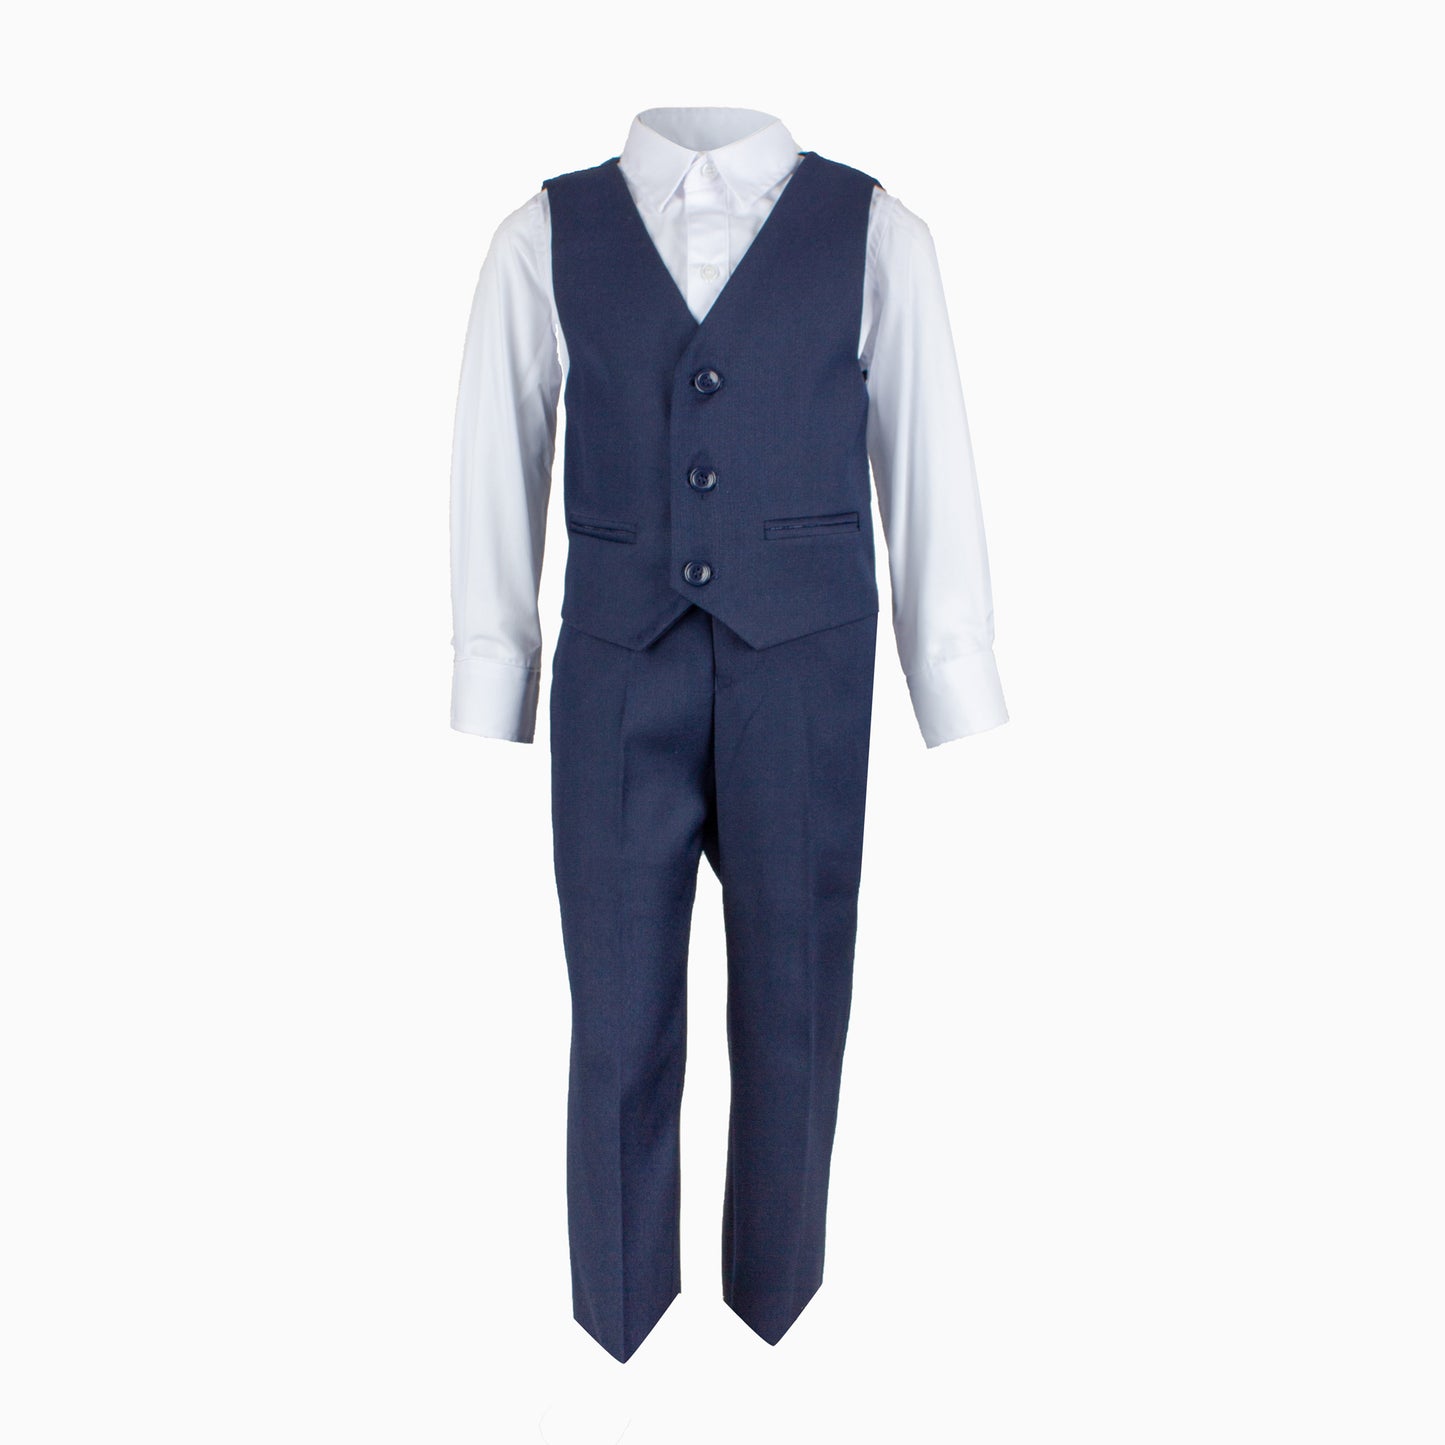 Boys' Formal Navy Suit, 3 Piece Set (size 8 years to 16 years)